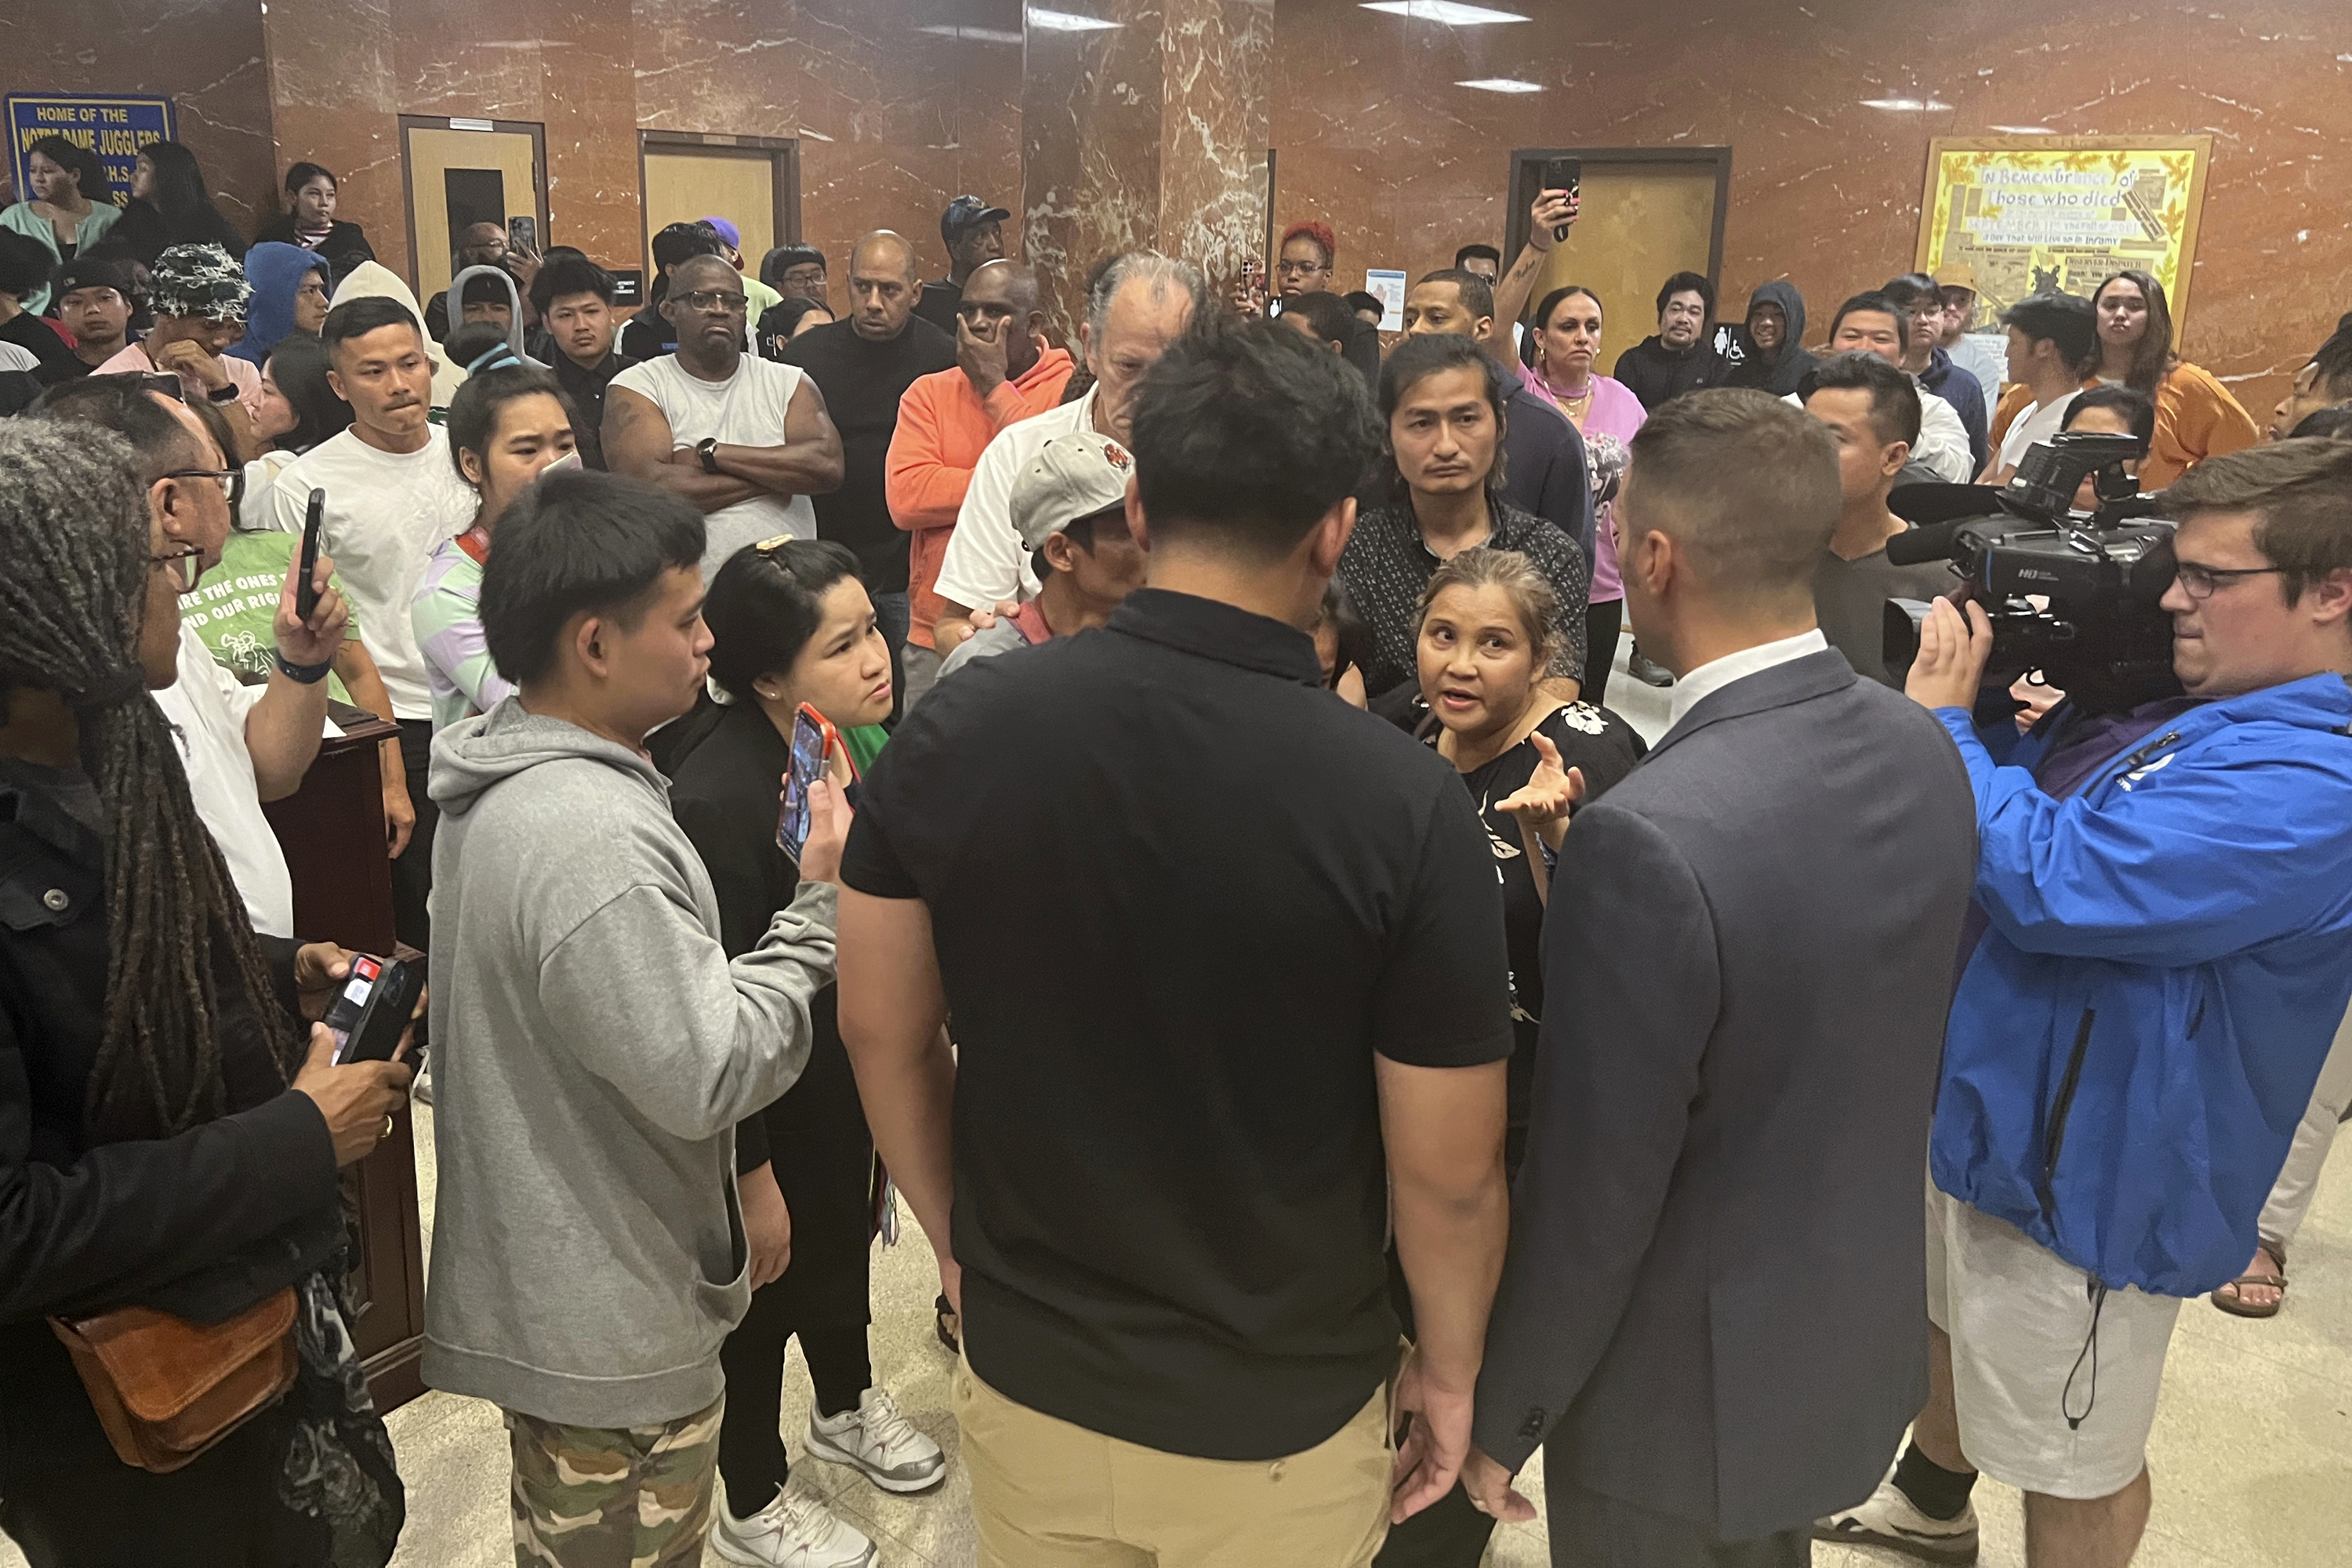 Utica Mayor Michael Galime, center right, grey jacket, talks with the family members of a 13-year-old boy who was fatally shot by a police officer Friday night after a news conference, Saturday, June 28, 2024 in Utica, N.Y. An officer shot and killed the teenager who was fleeing while wielding a “realistic appearing firearm," authorities said Saturday. (Kenny Lacy Jr./Syracuse.com via AP)